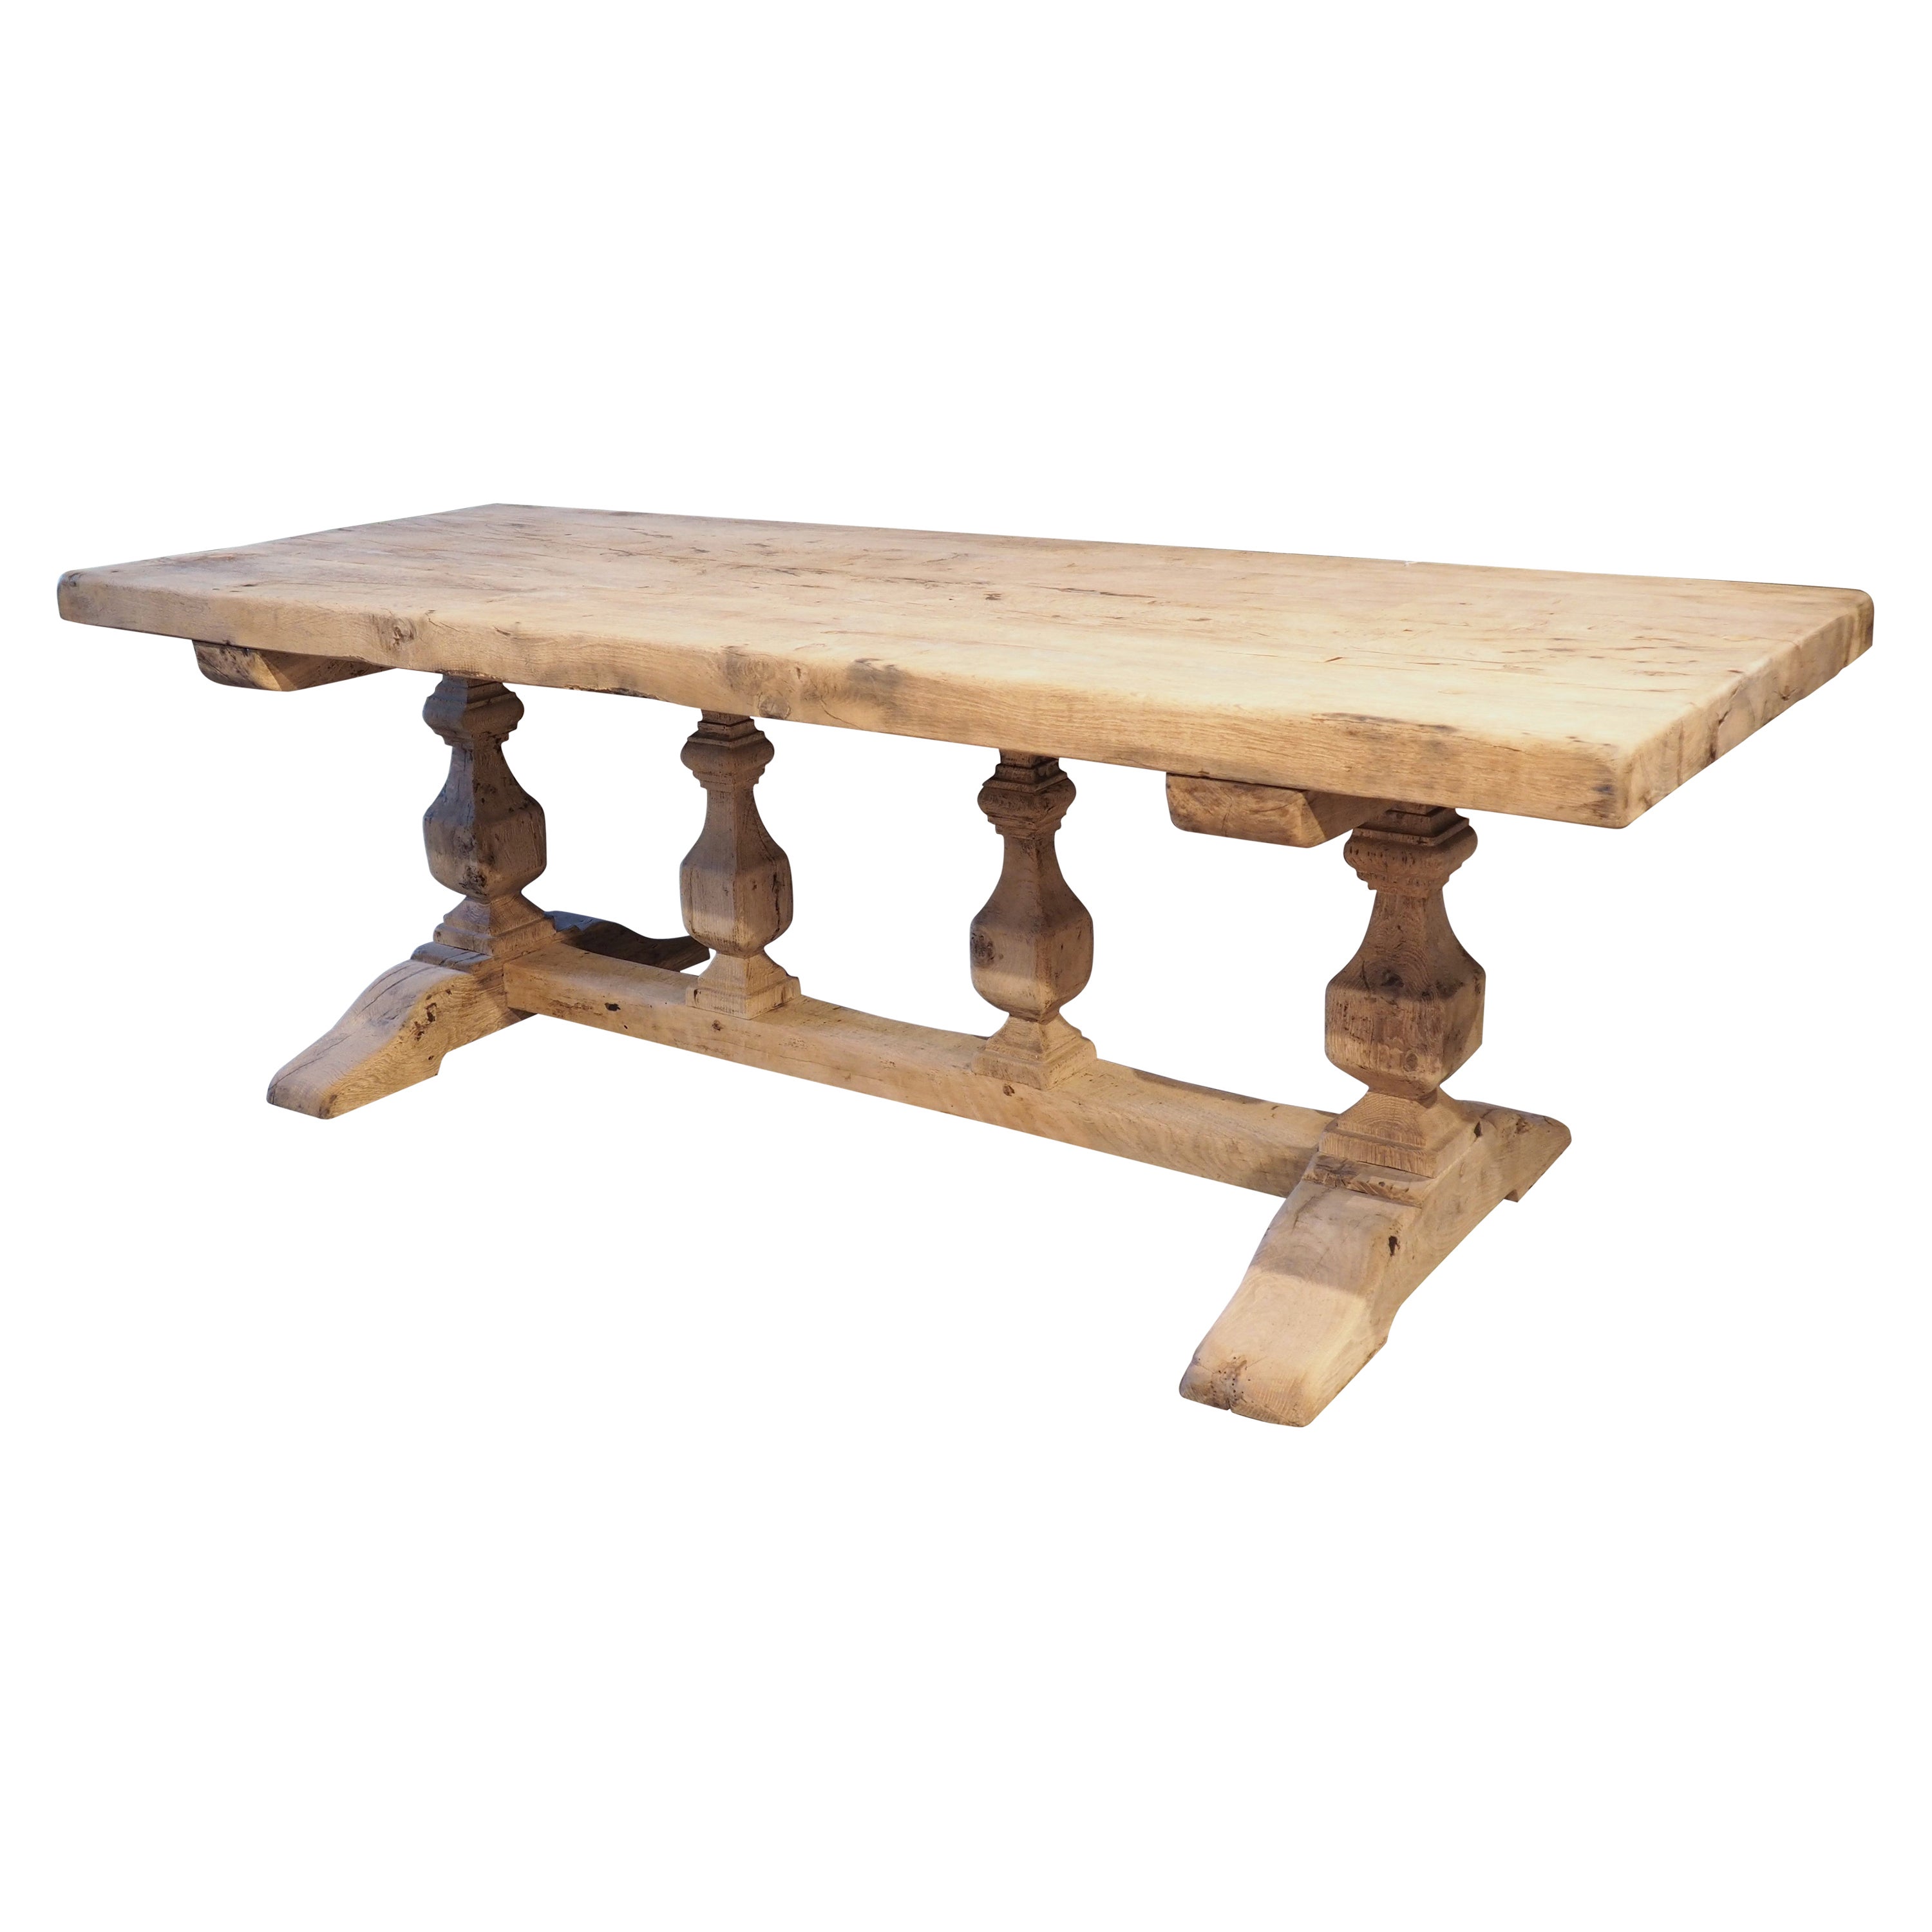 Early 1900s French Bleached Oak Monastery Table with Balustrade Stretcher